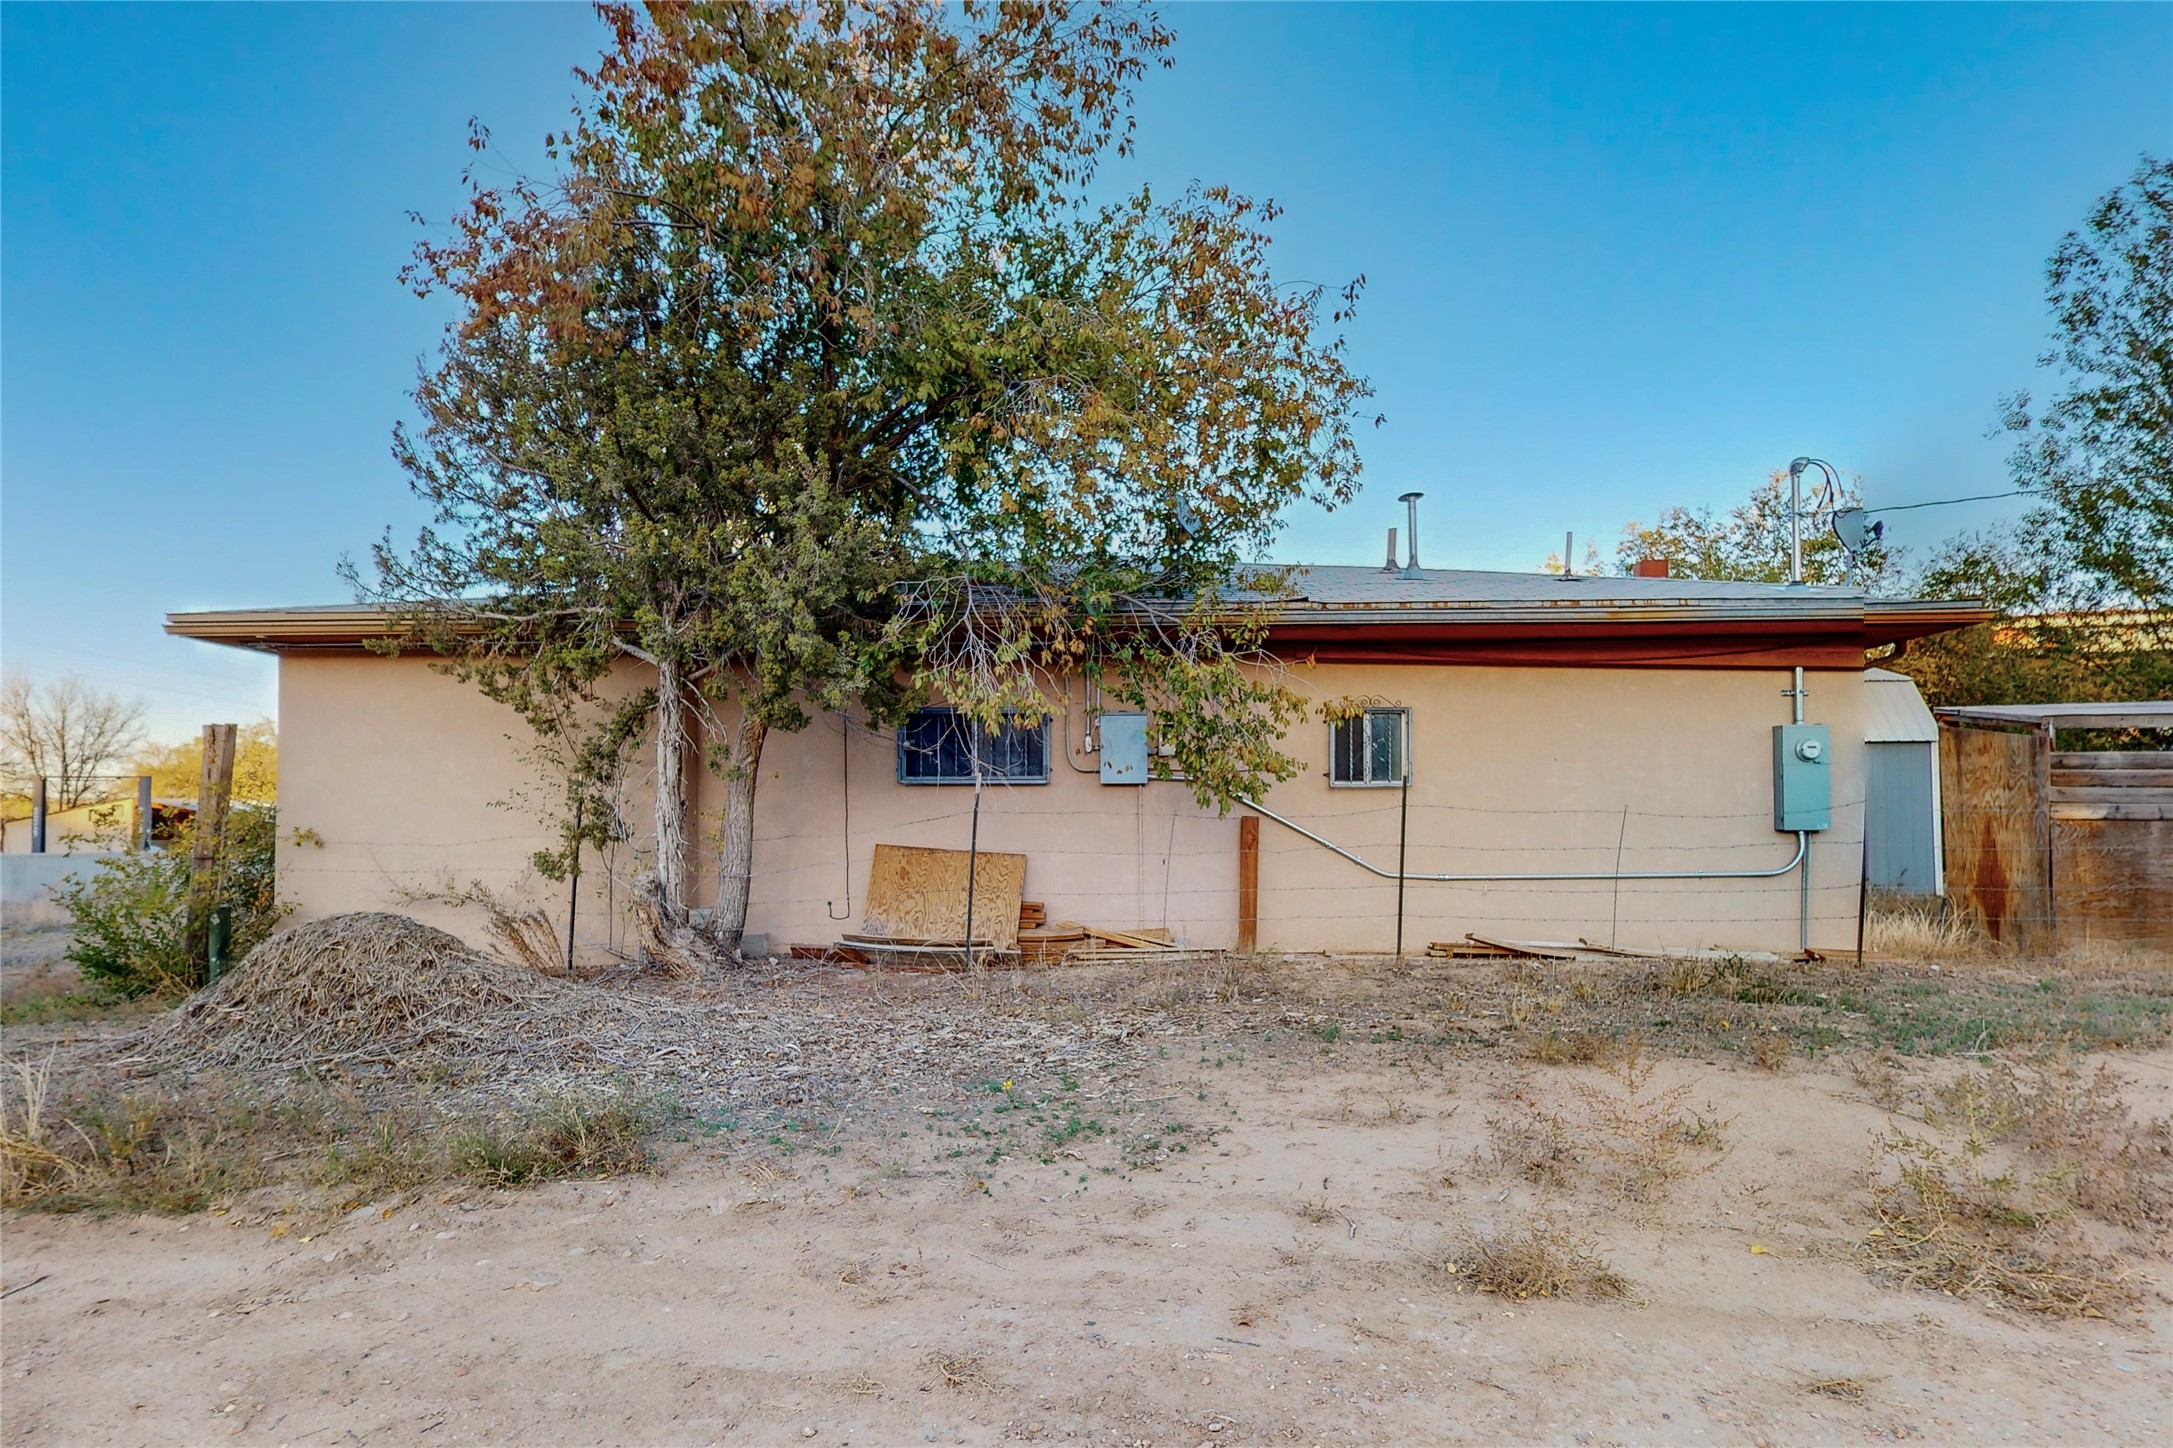 61C Feather C, Santa Fe, New Mexico 87506, 3 Bedrooms Bedrooms, ,2 BathroomsBathrooms,Residential,For Sale,61C Feather C,202341427